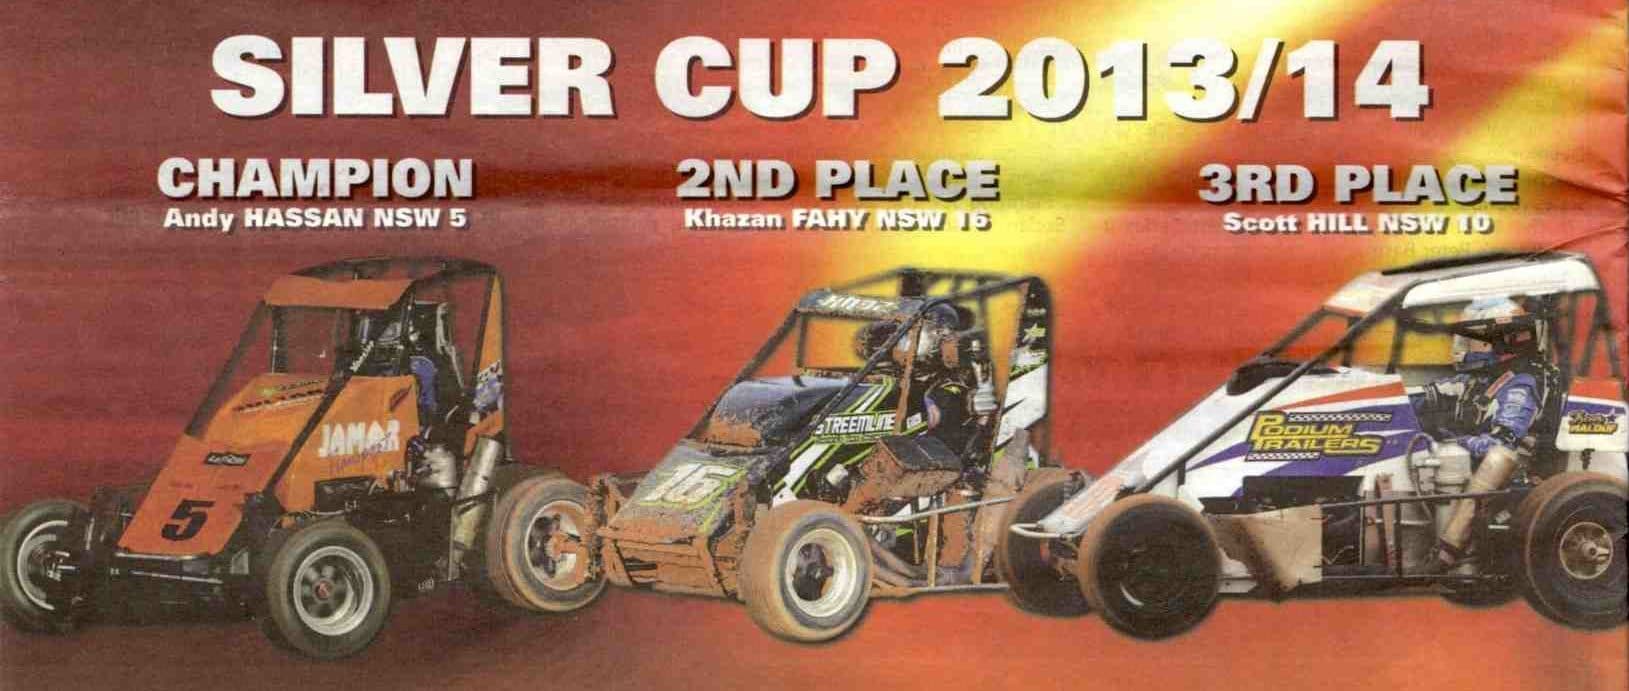 Andy Hassan Racing Silver Cup Champion